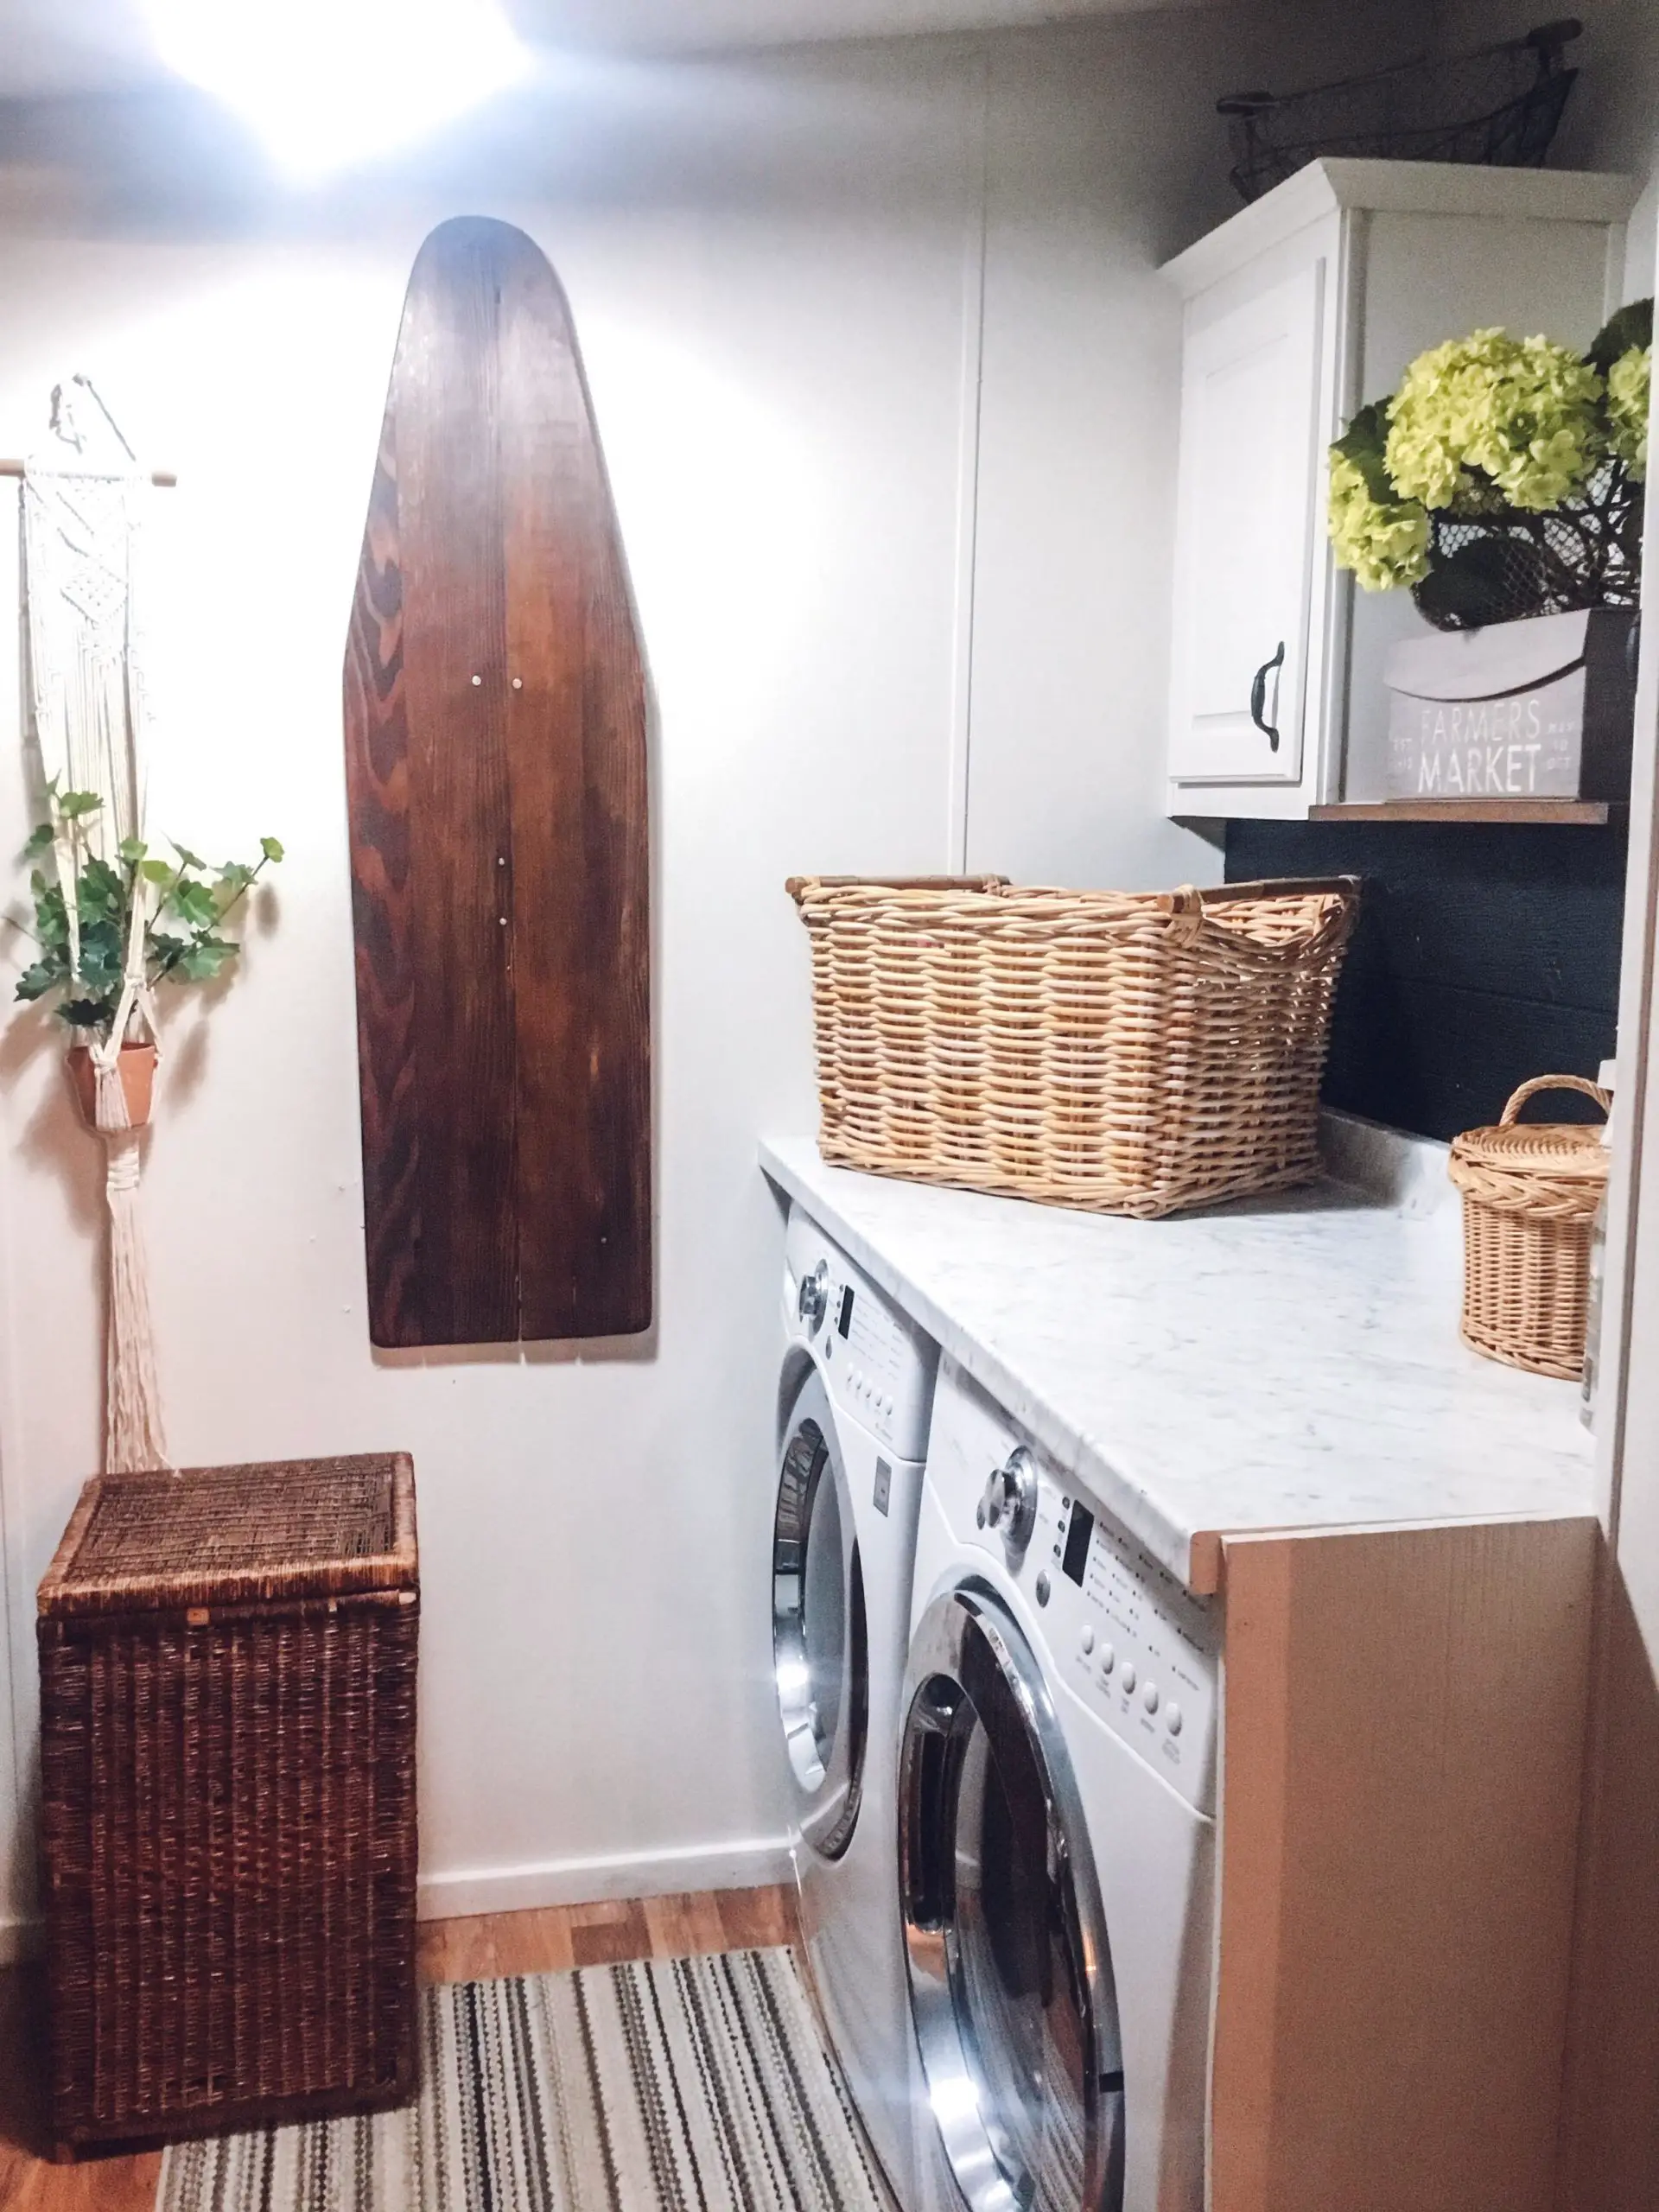 Laundry Basket with Matching Ironing Board in Wash Room